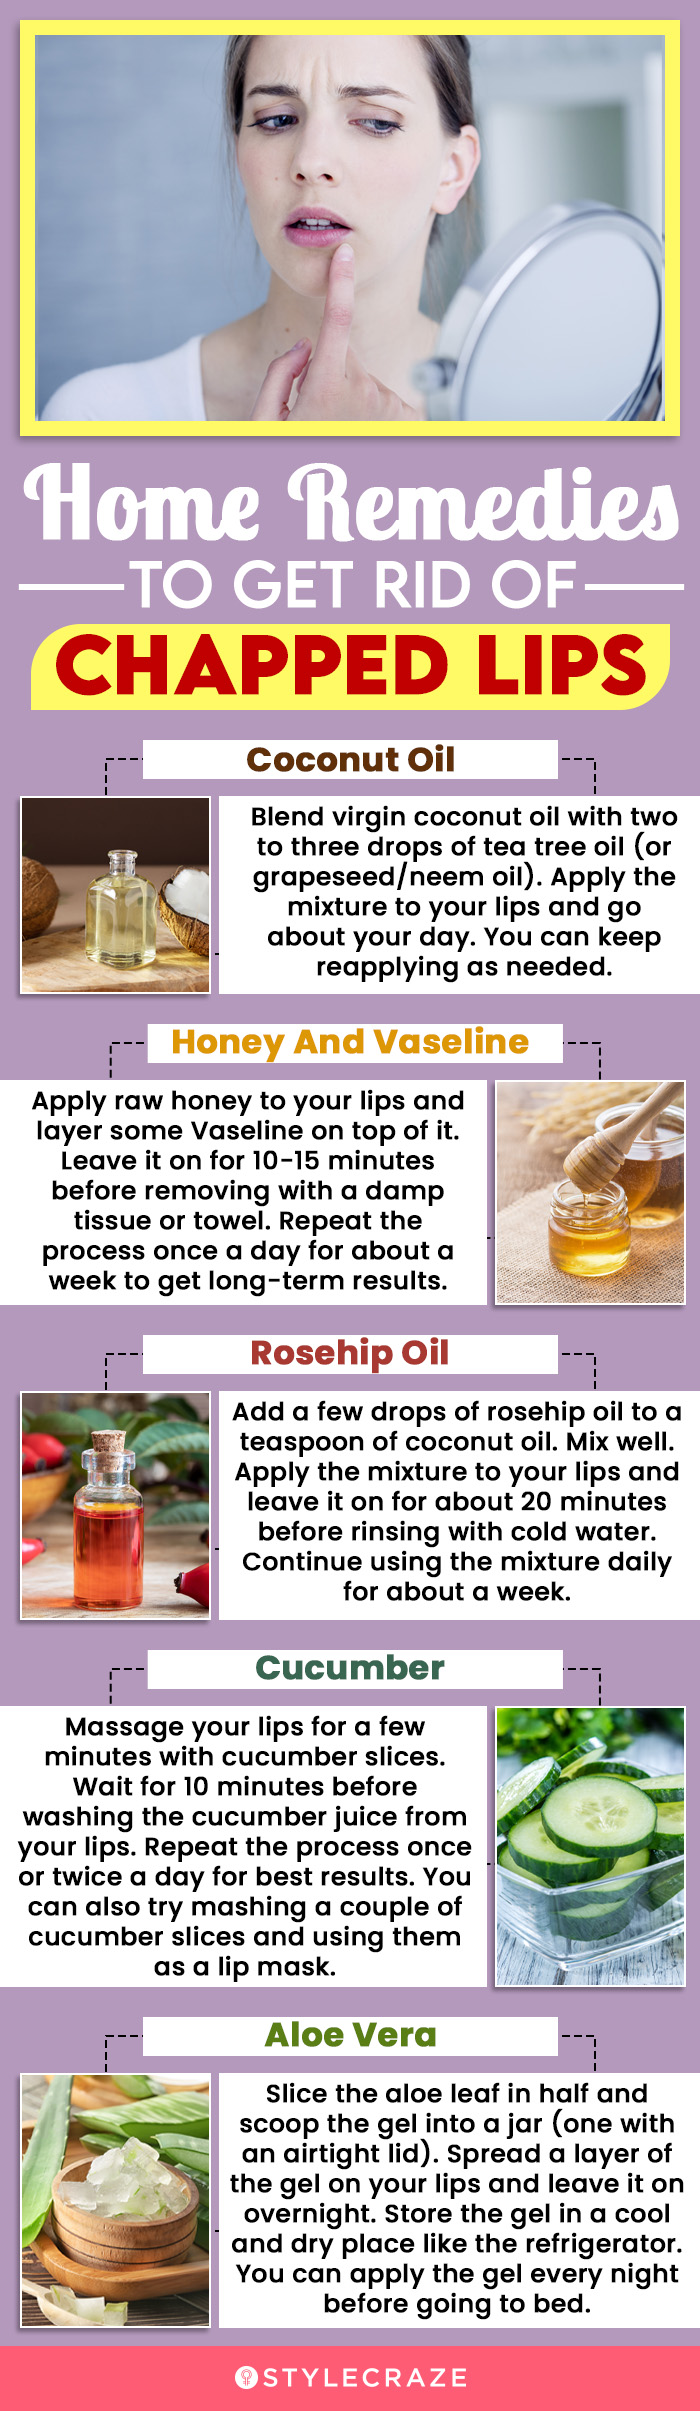 home remedies to get rid of chapped lips [infographic]